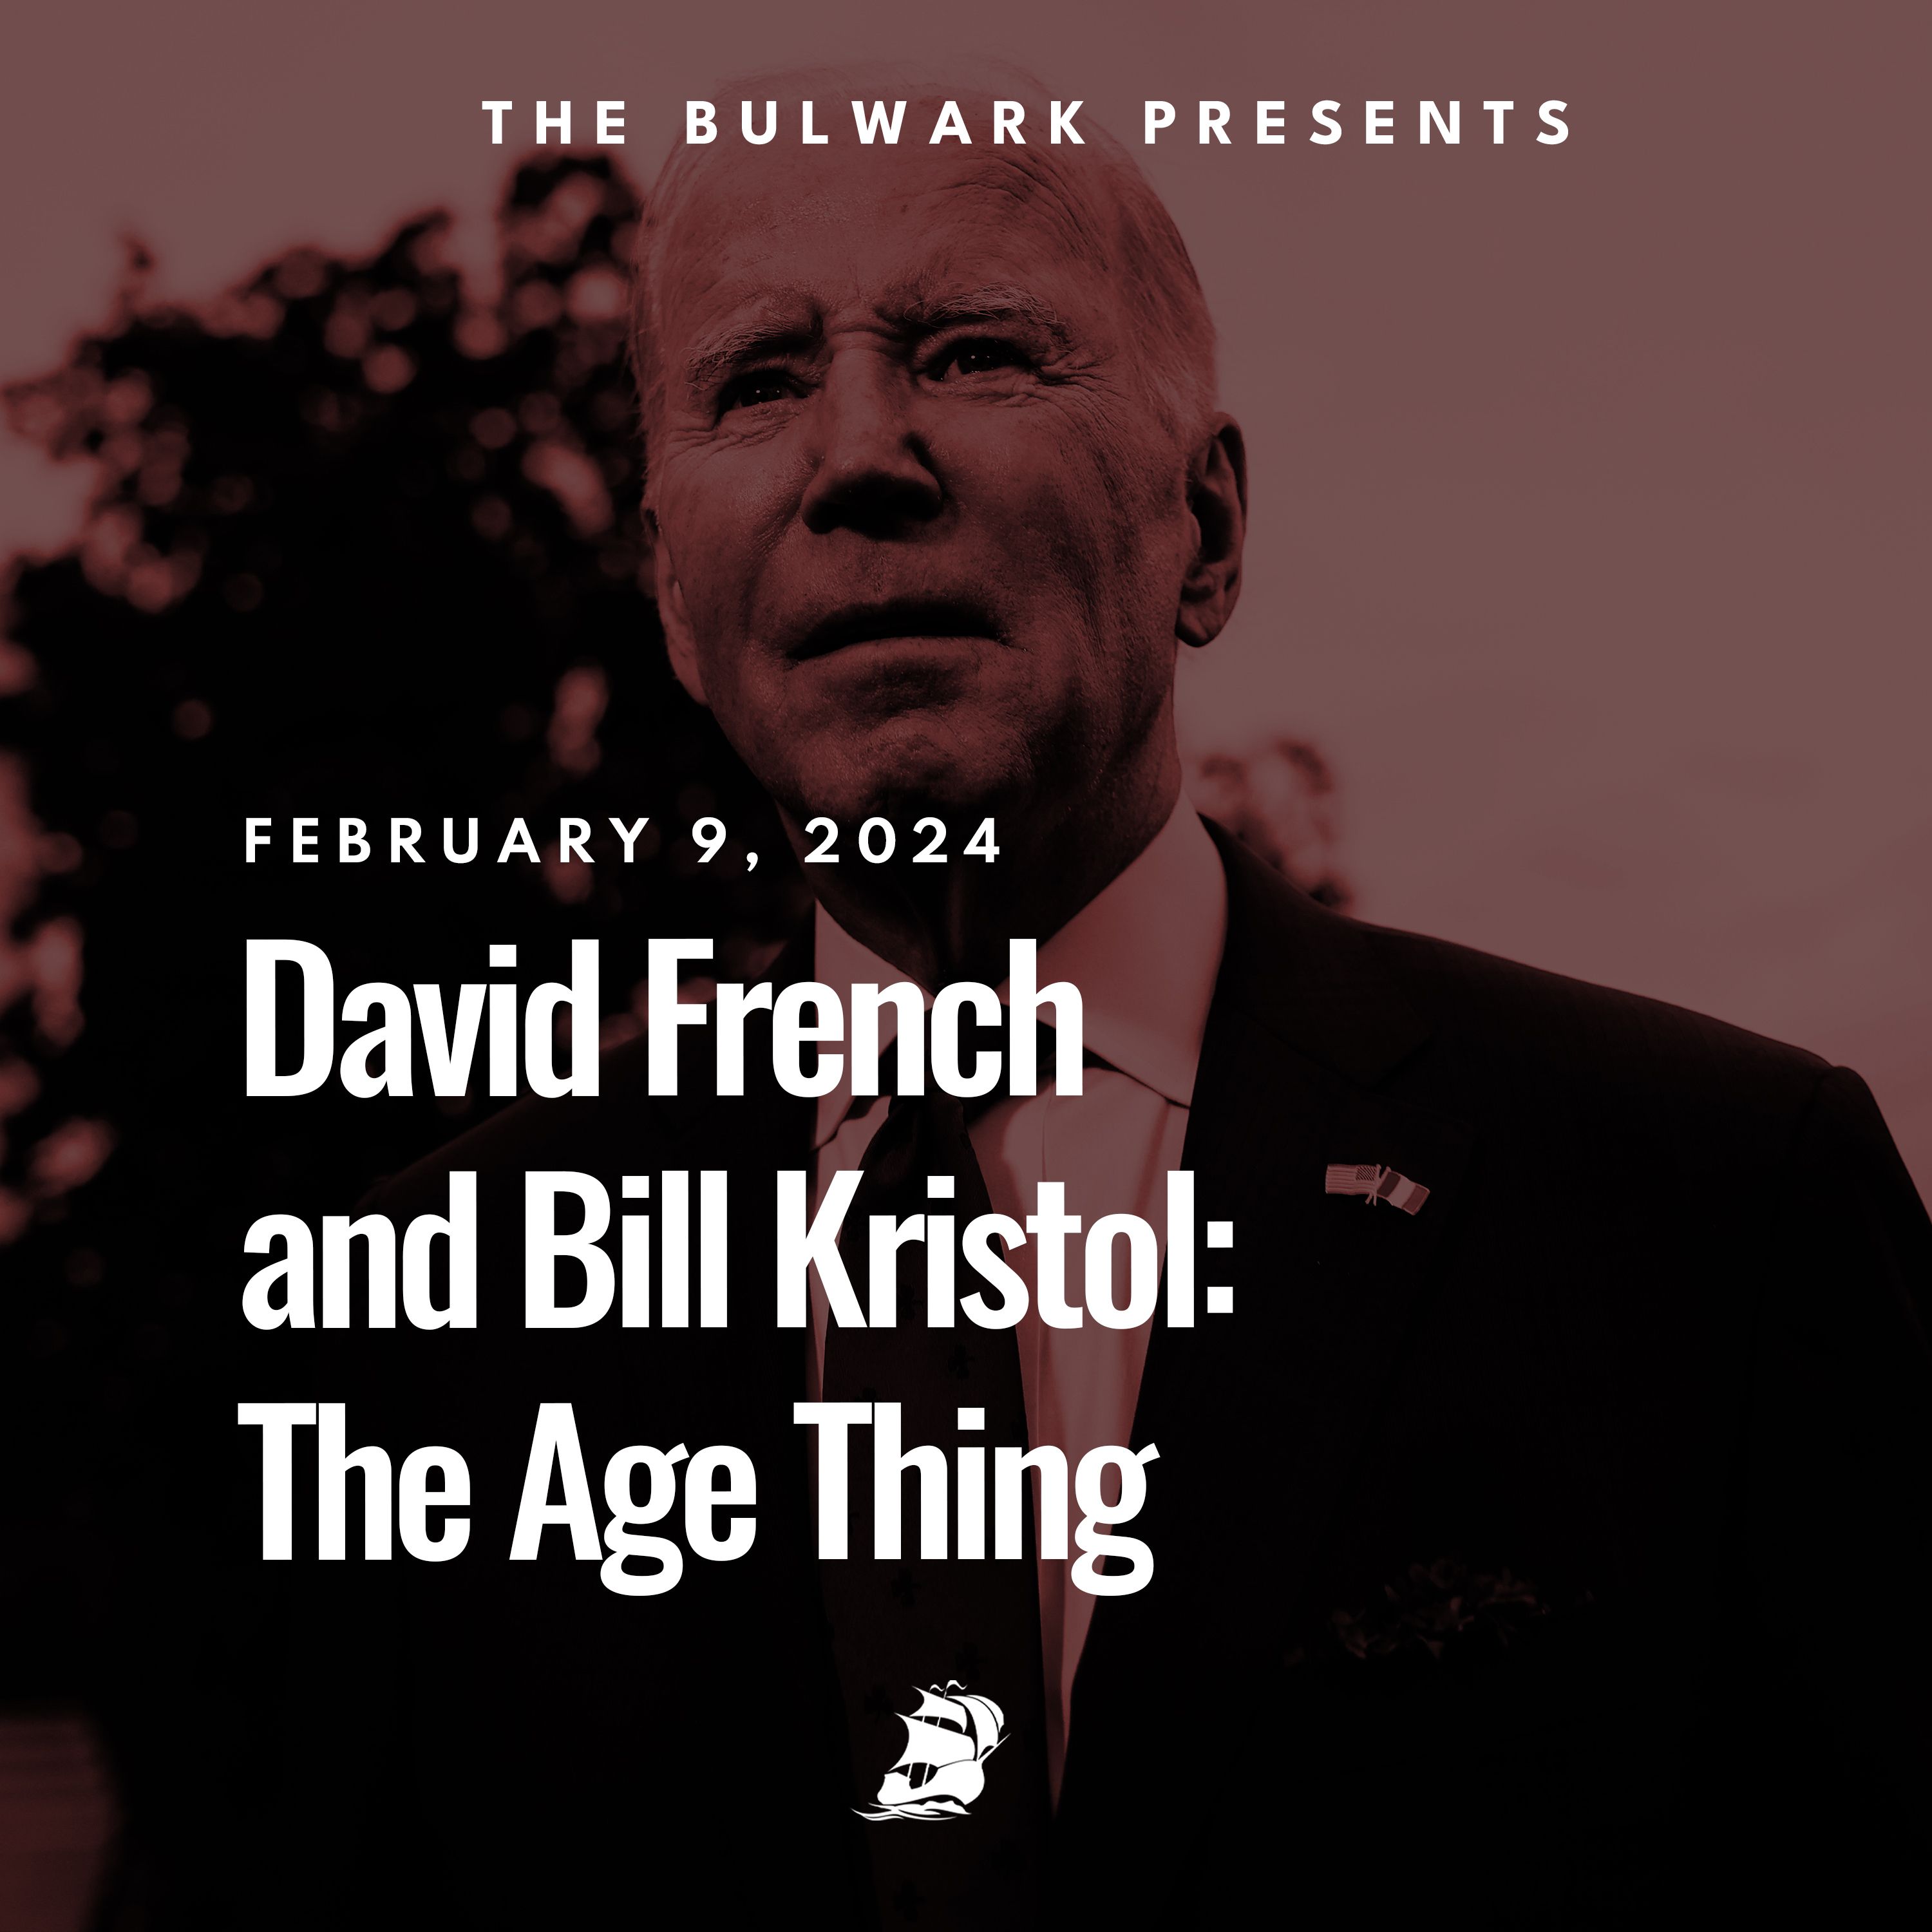 David French and Bill Kristol: The Age Thing